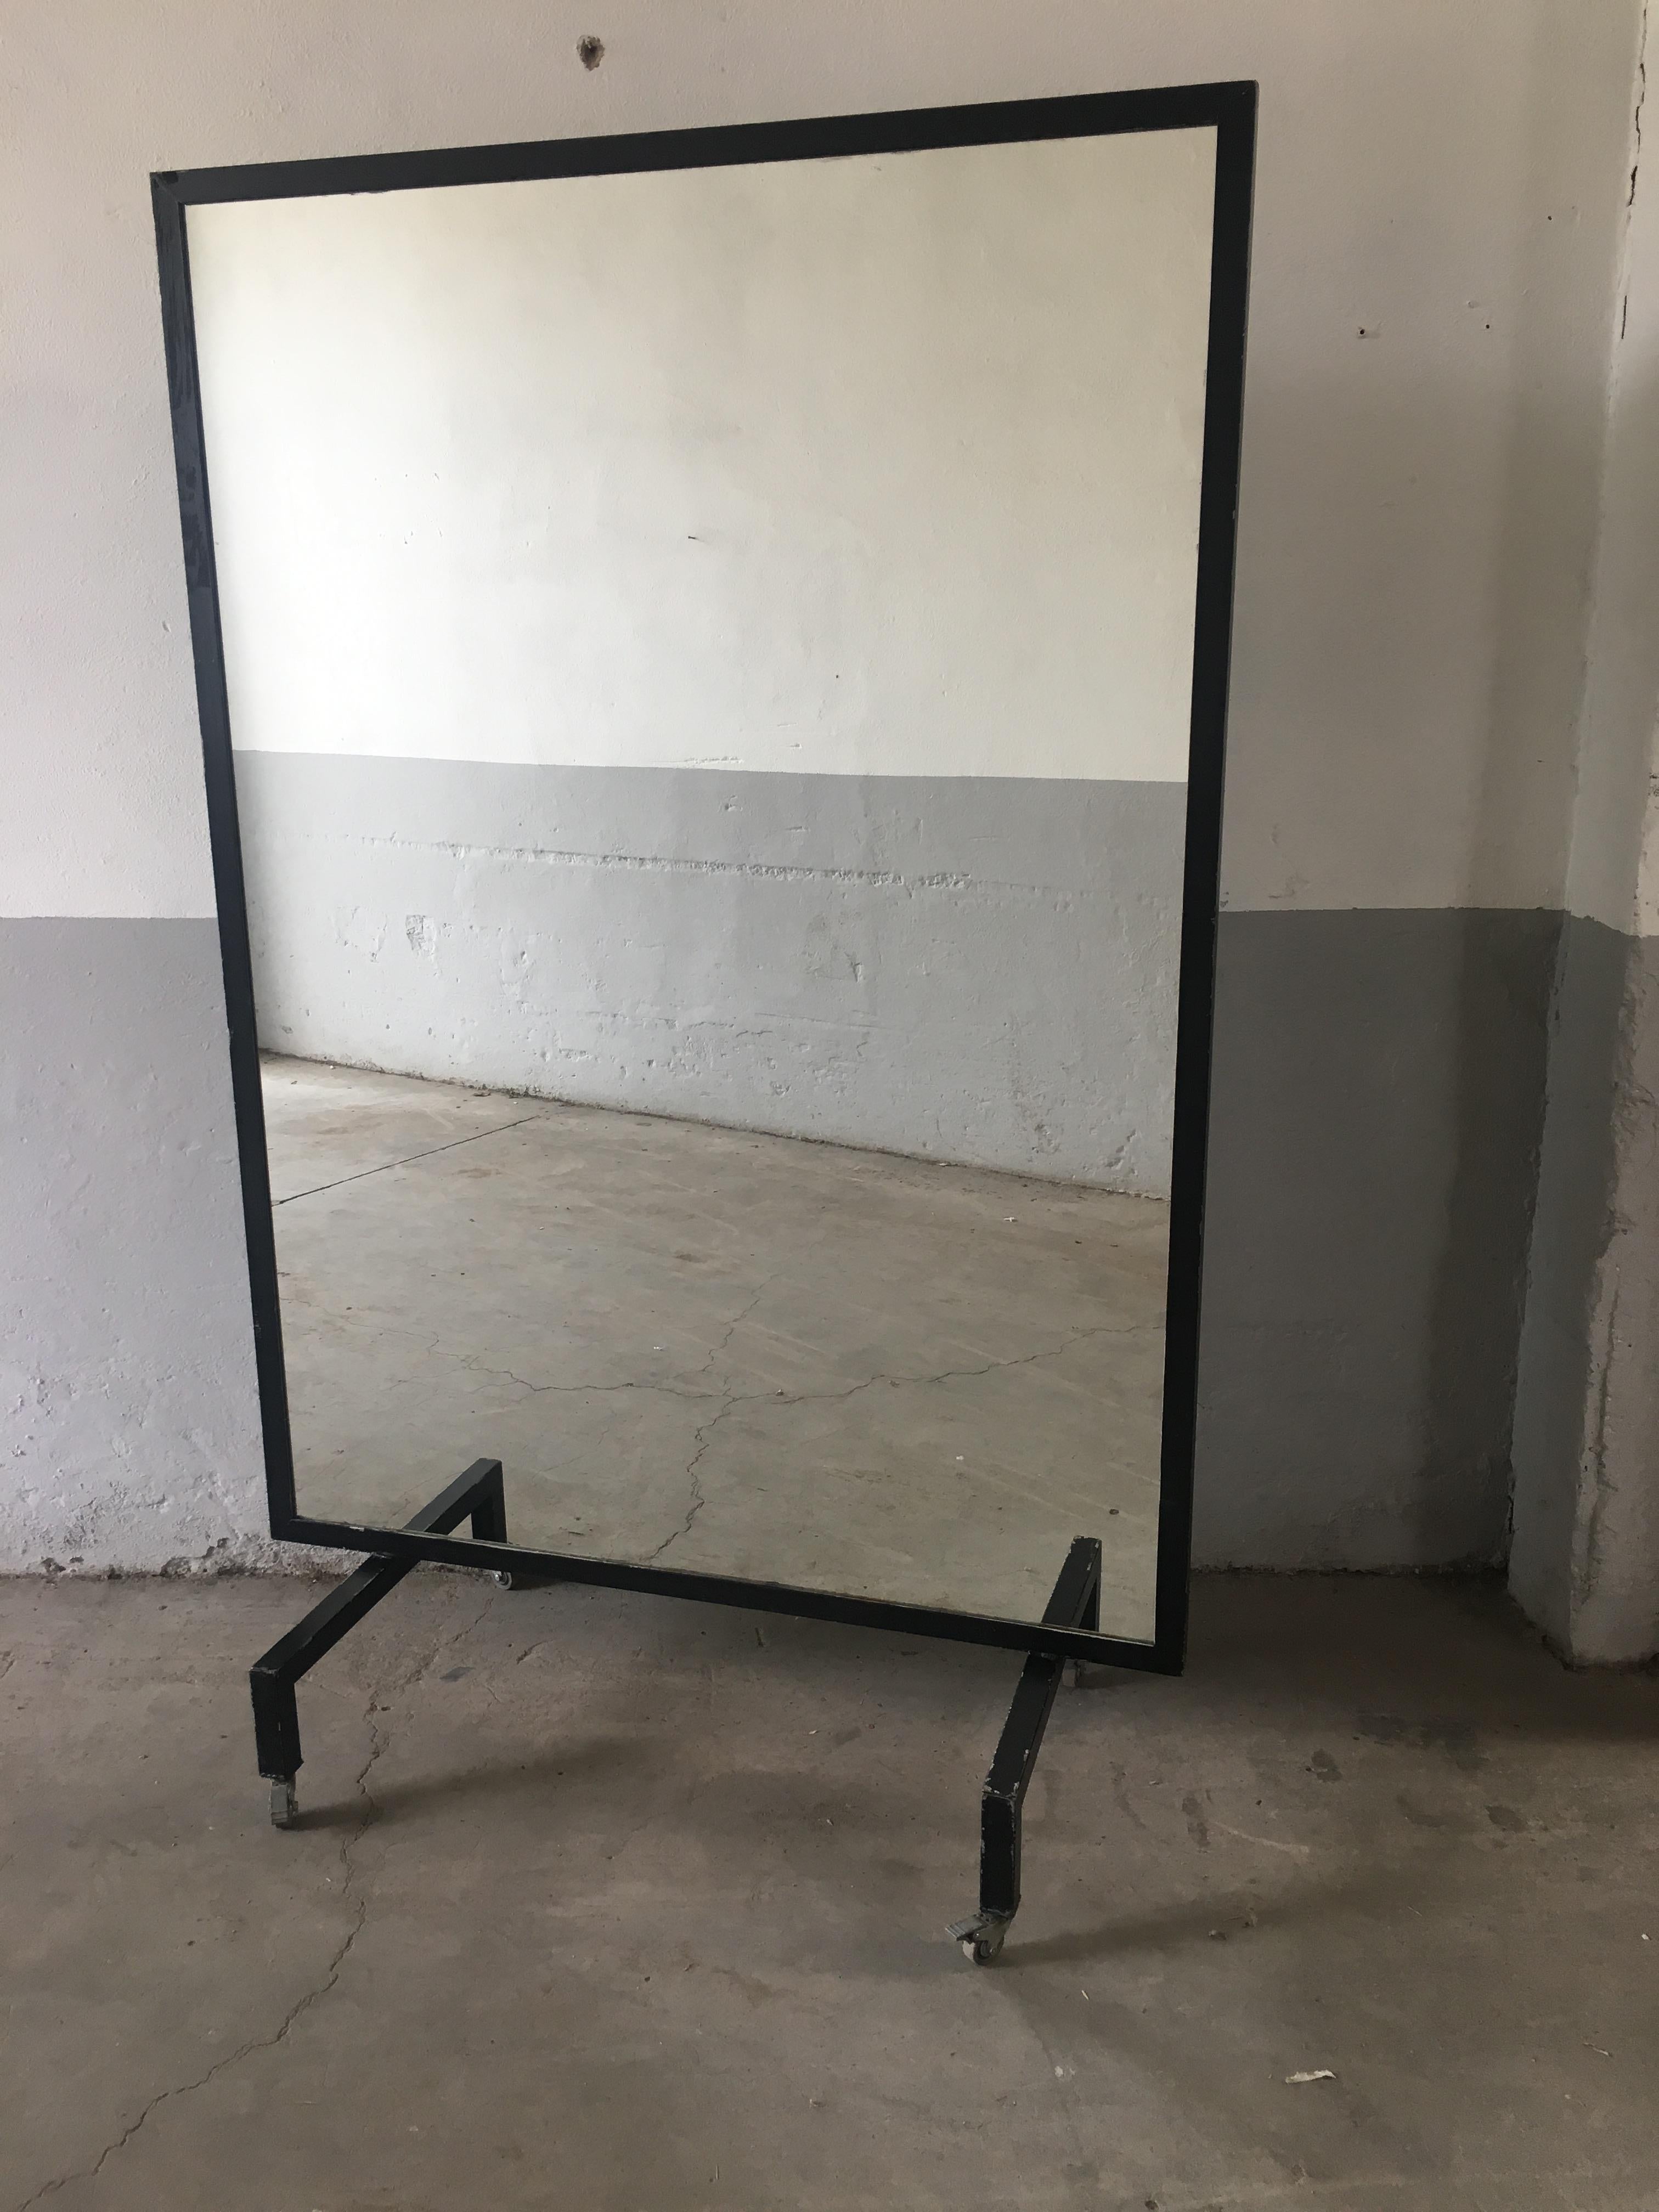 Mid-Century Modern Italian black iron framed full-length free standing large mirror on wheels.
This mirror comes from a ballet school and can be used to embellish any room of your house.